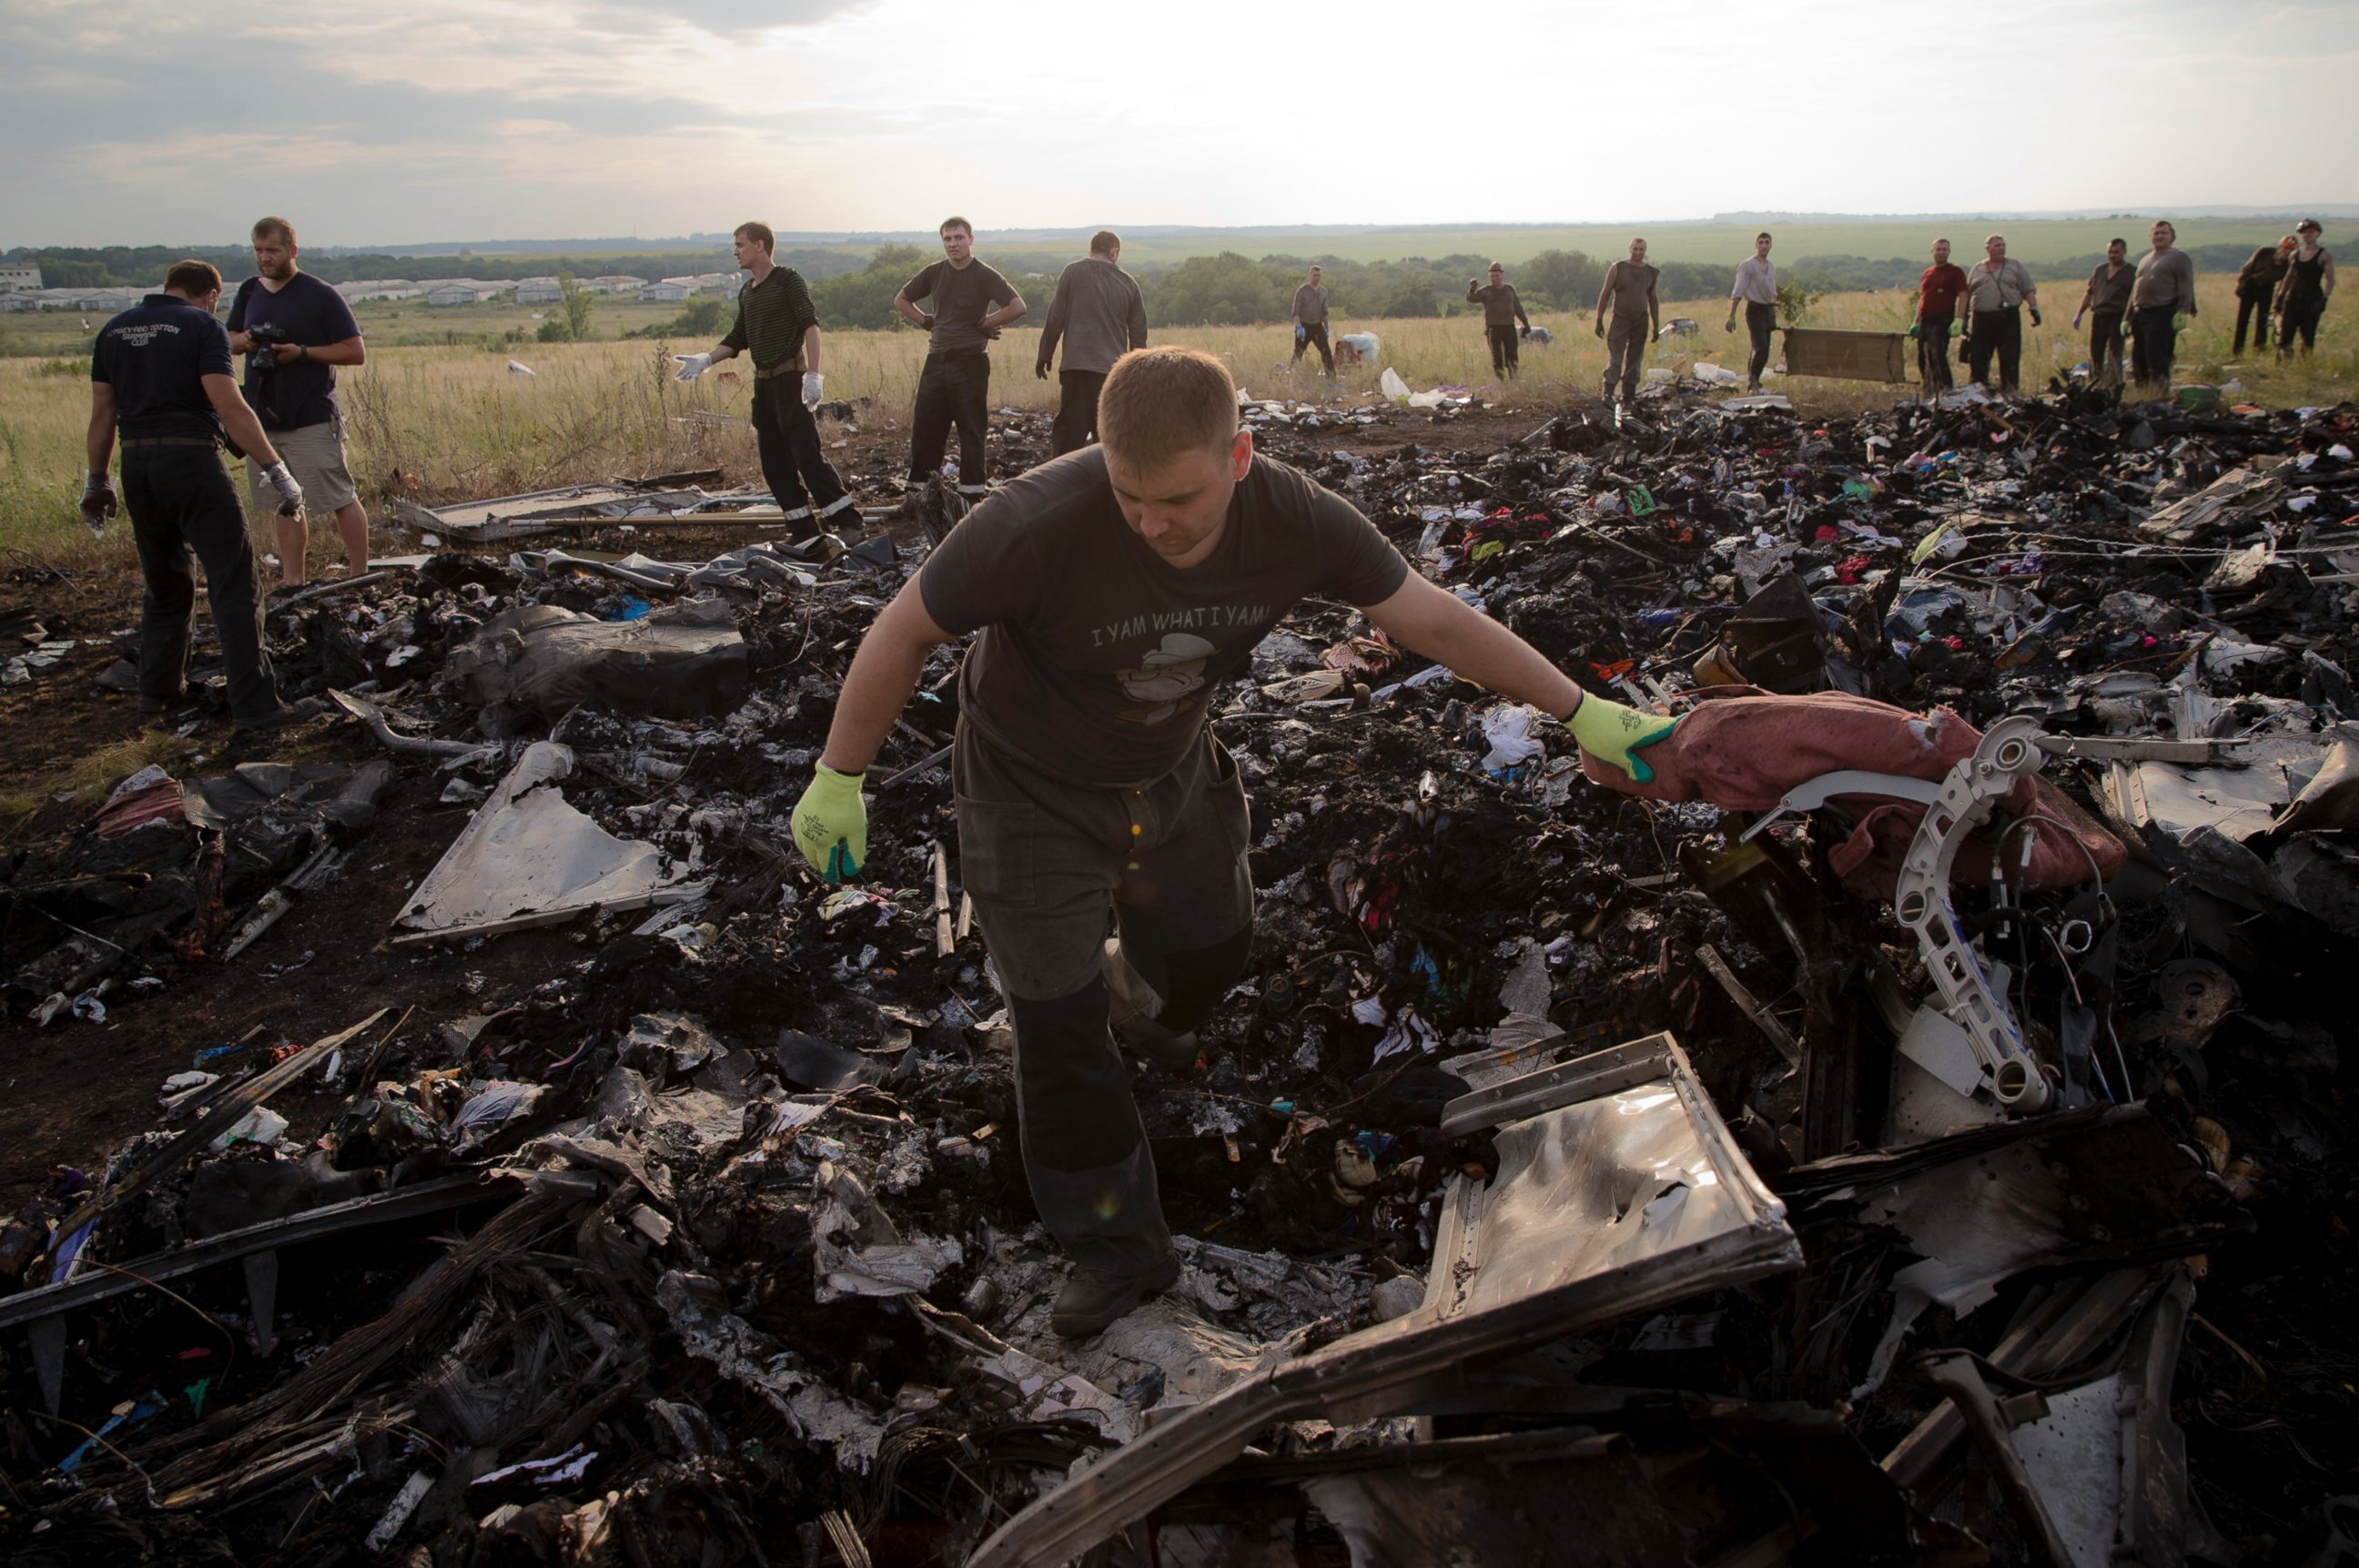 PHOTO: A man looks for the remains of victims in the debris at the crash site of Malaysia Airlines Flight 17 near the village of Hrabove, eastern Ukraine, July 19, 2014.  